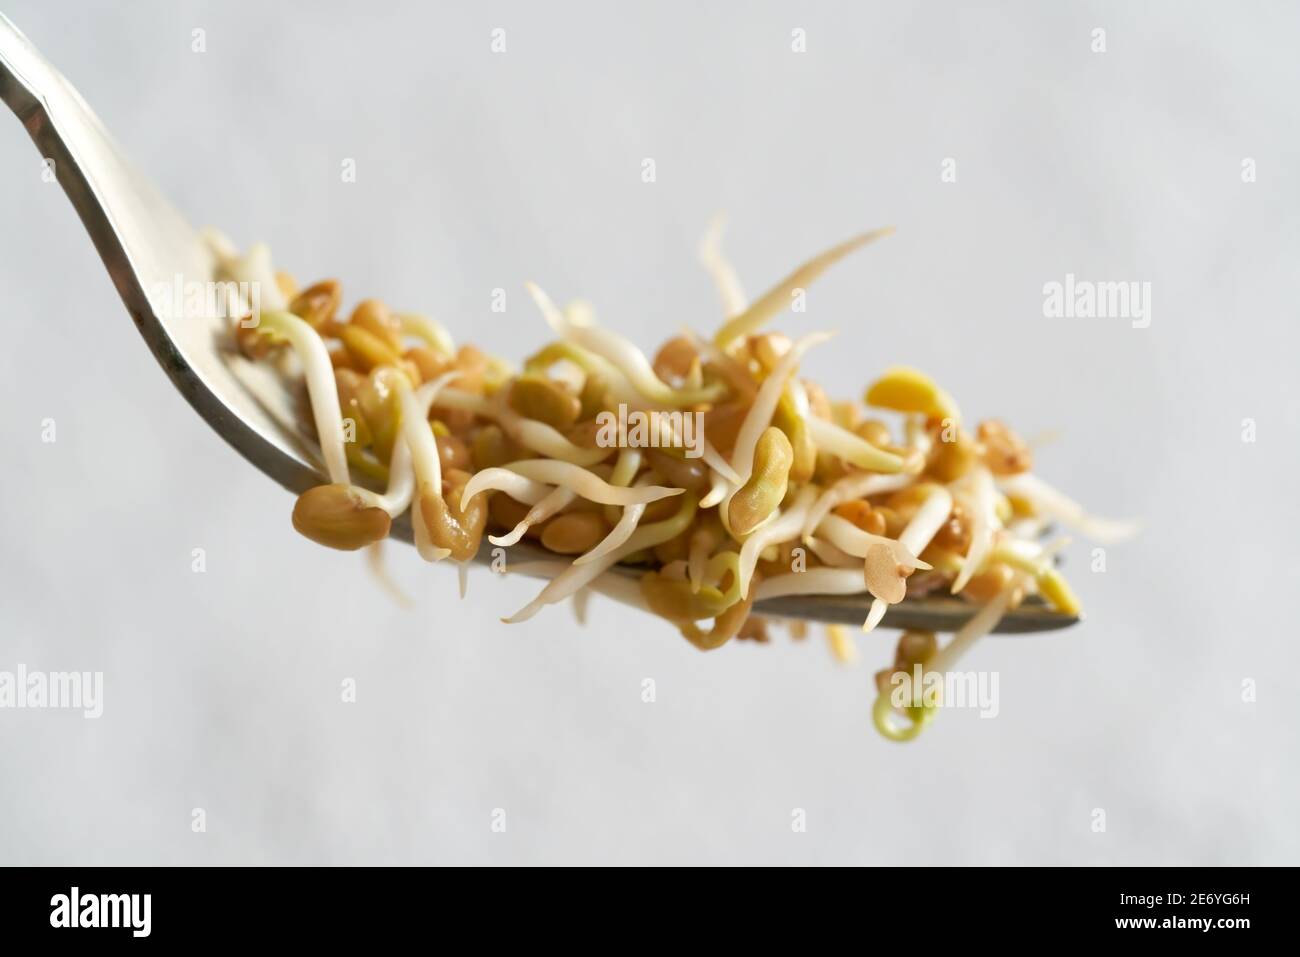 Sprouted fenugreek seeds on a fork against a bright background Stock Photo